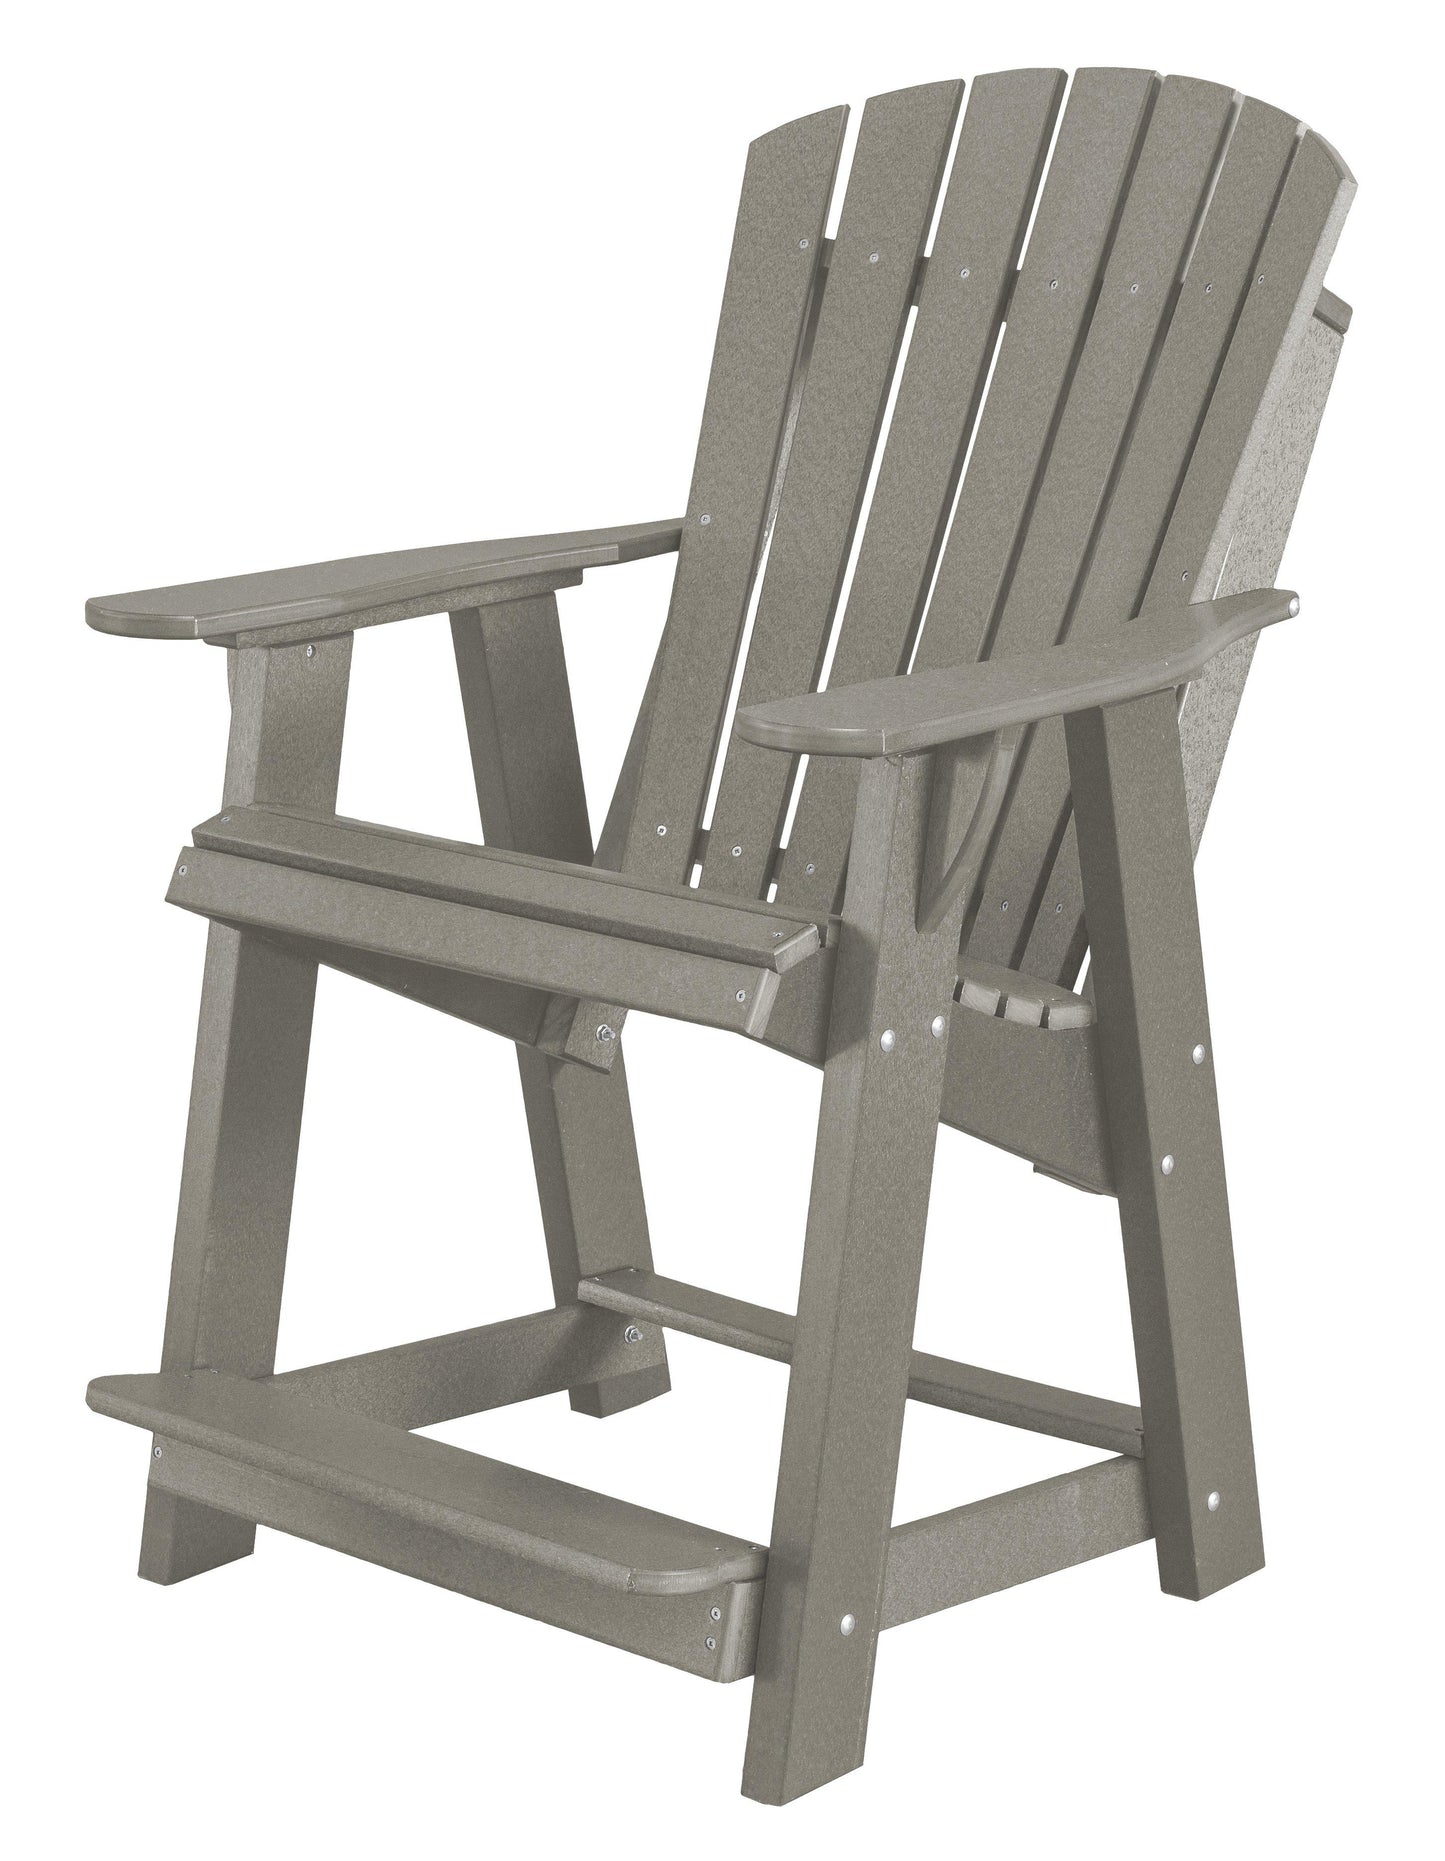 Wildridge Recycled Plastic High Adirondack Chair Table Set (COUNTER HEIGHT) - LEAD TIME TO SHIP 6 WEEKS OR LESS